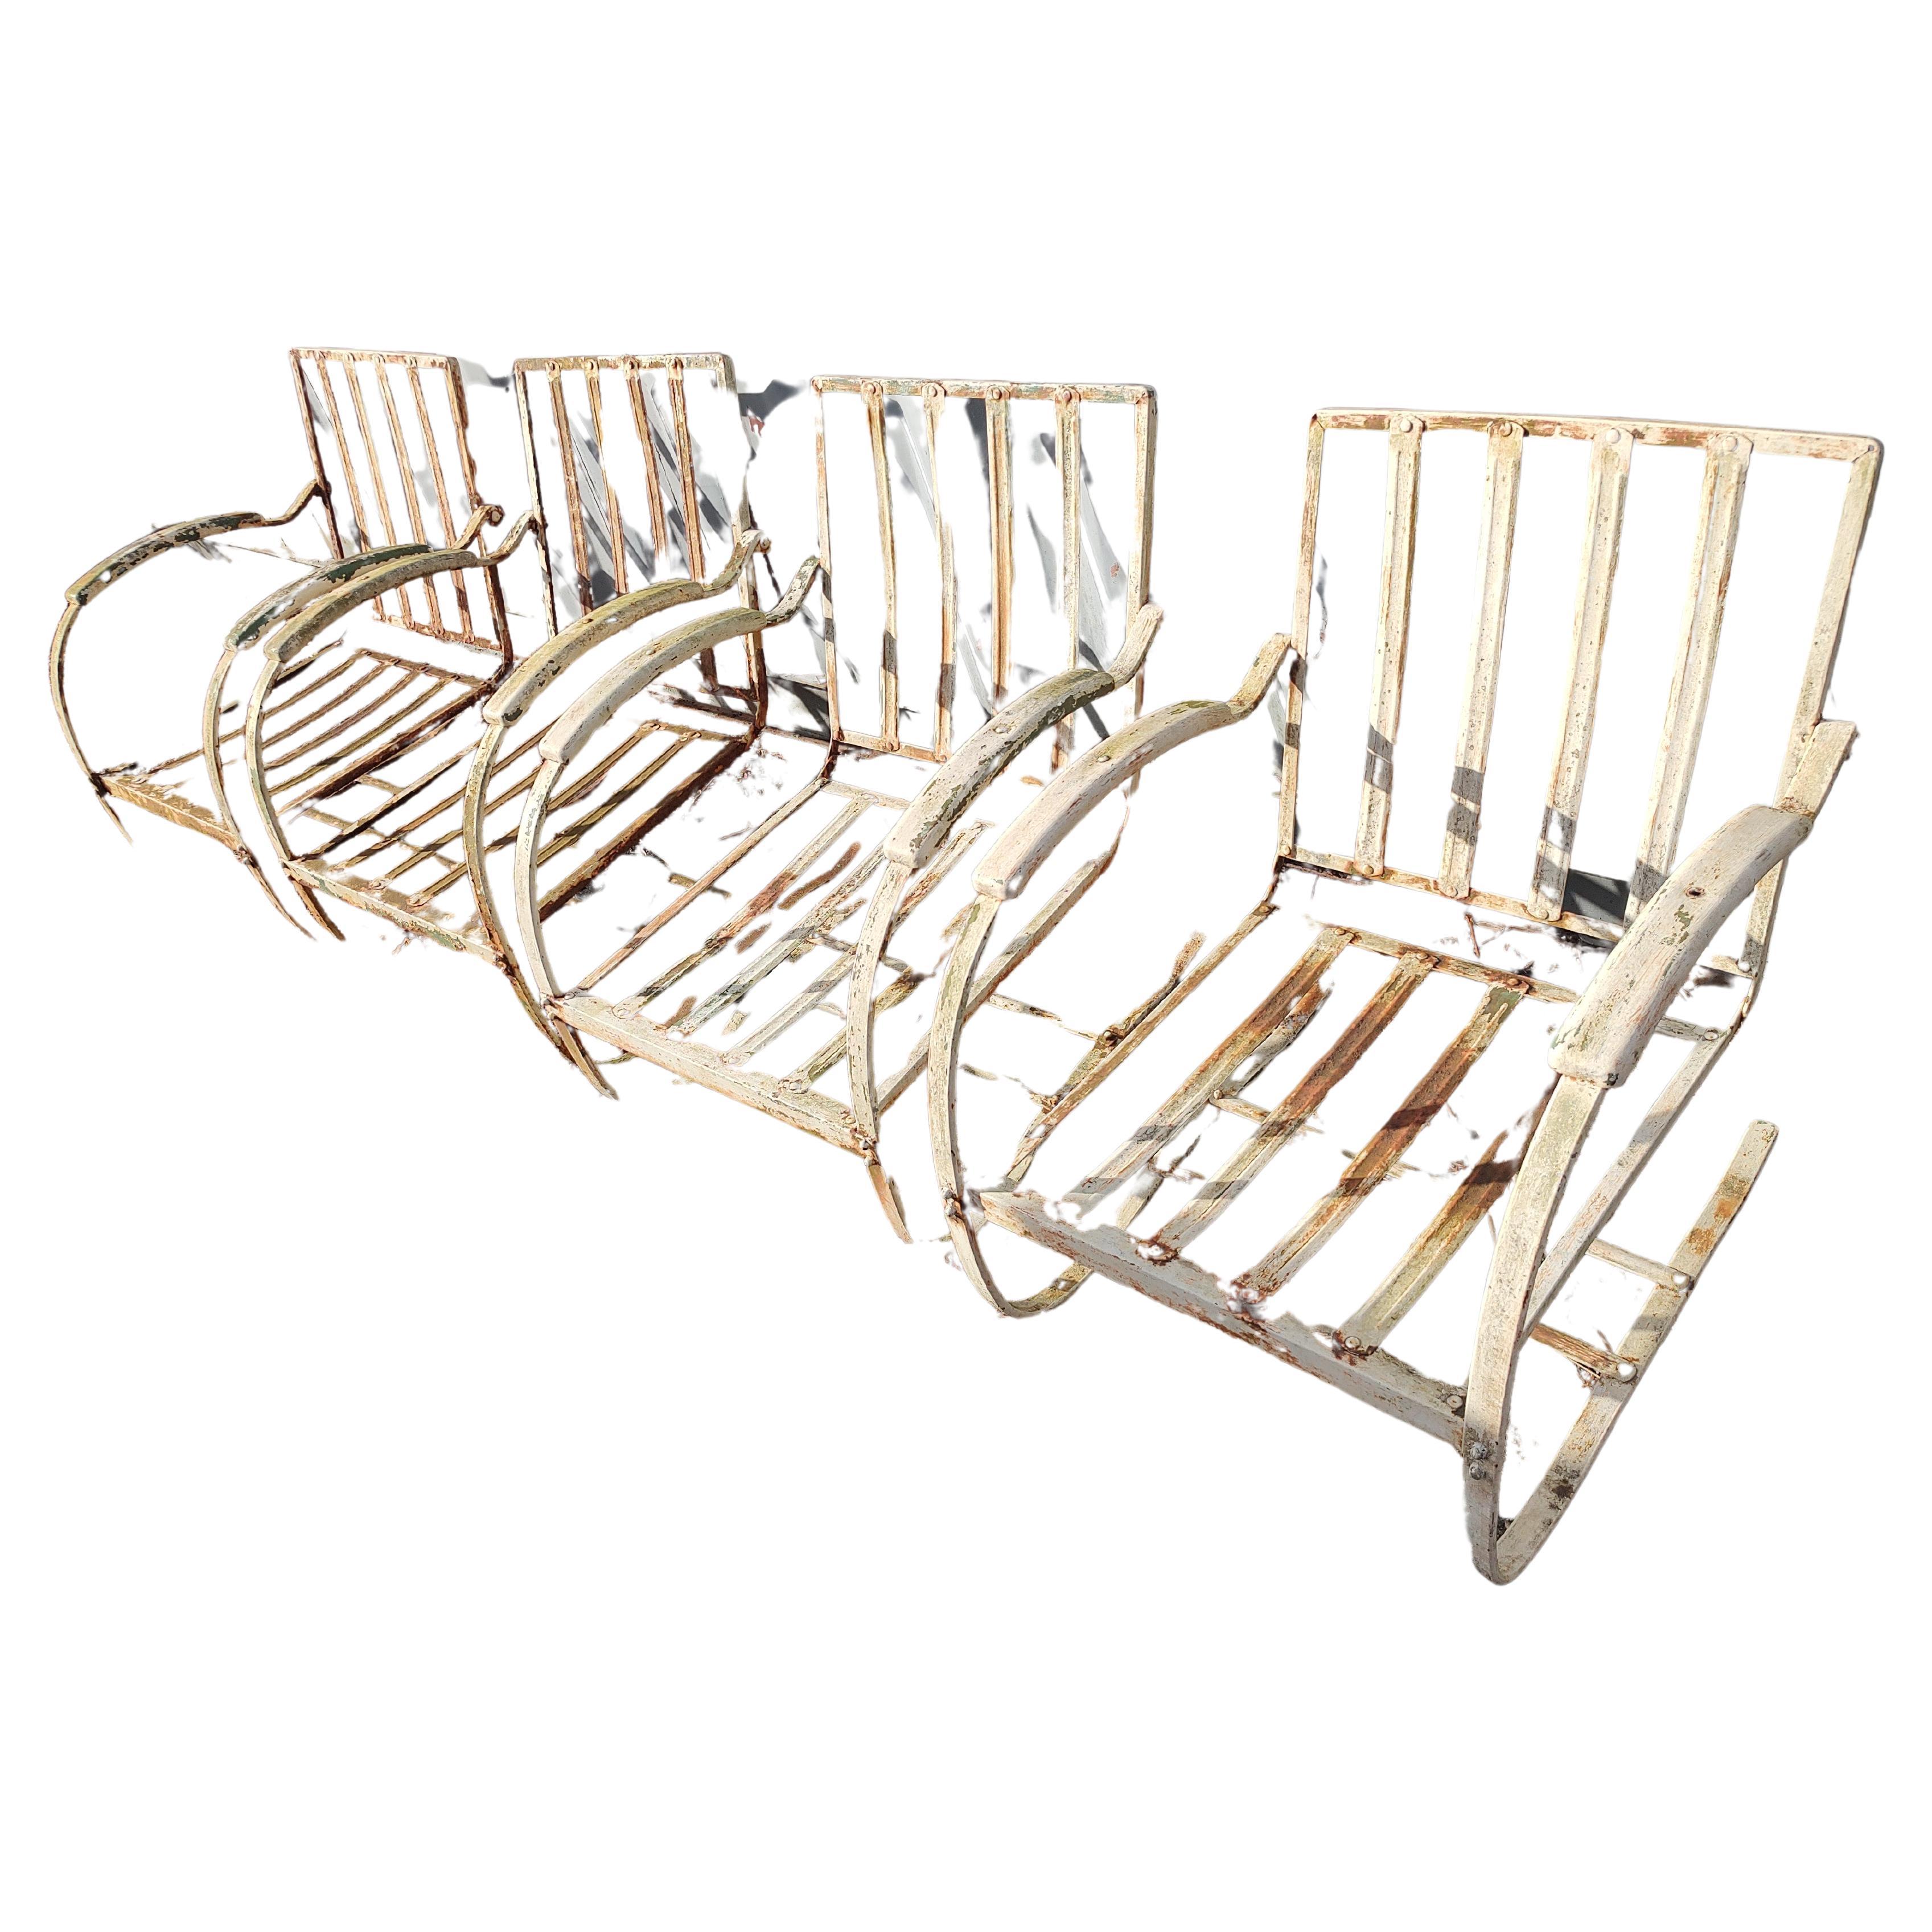 Mid-20th Century Two Pairs of Art Deco Cantilevered Spring Steel & Iron Lounge Chairs C1948 For Sale